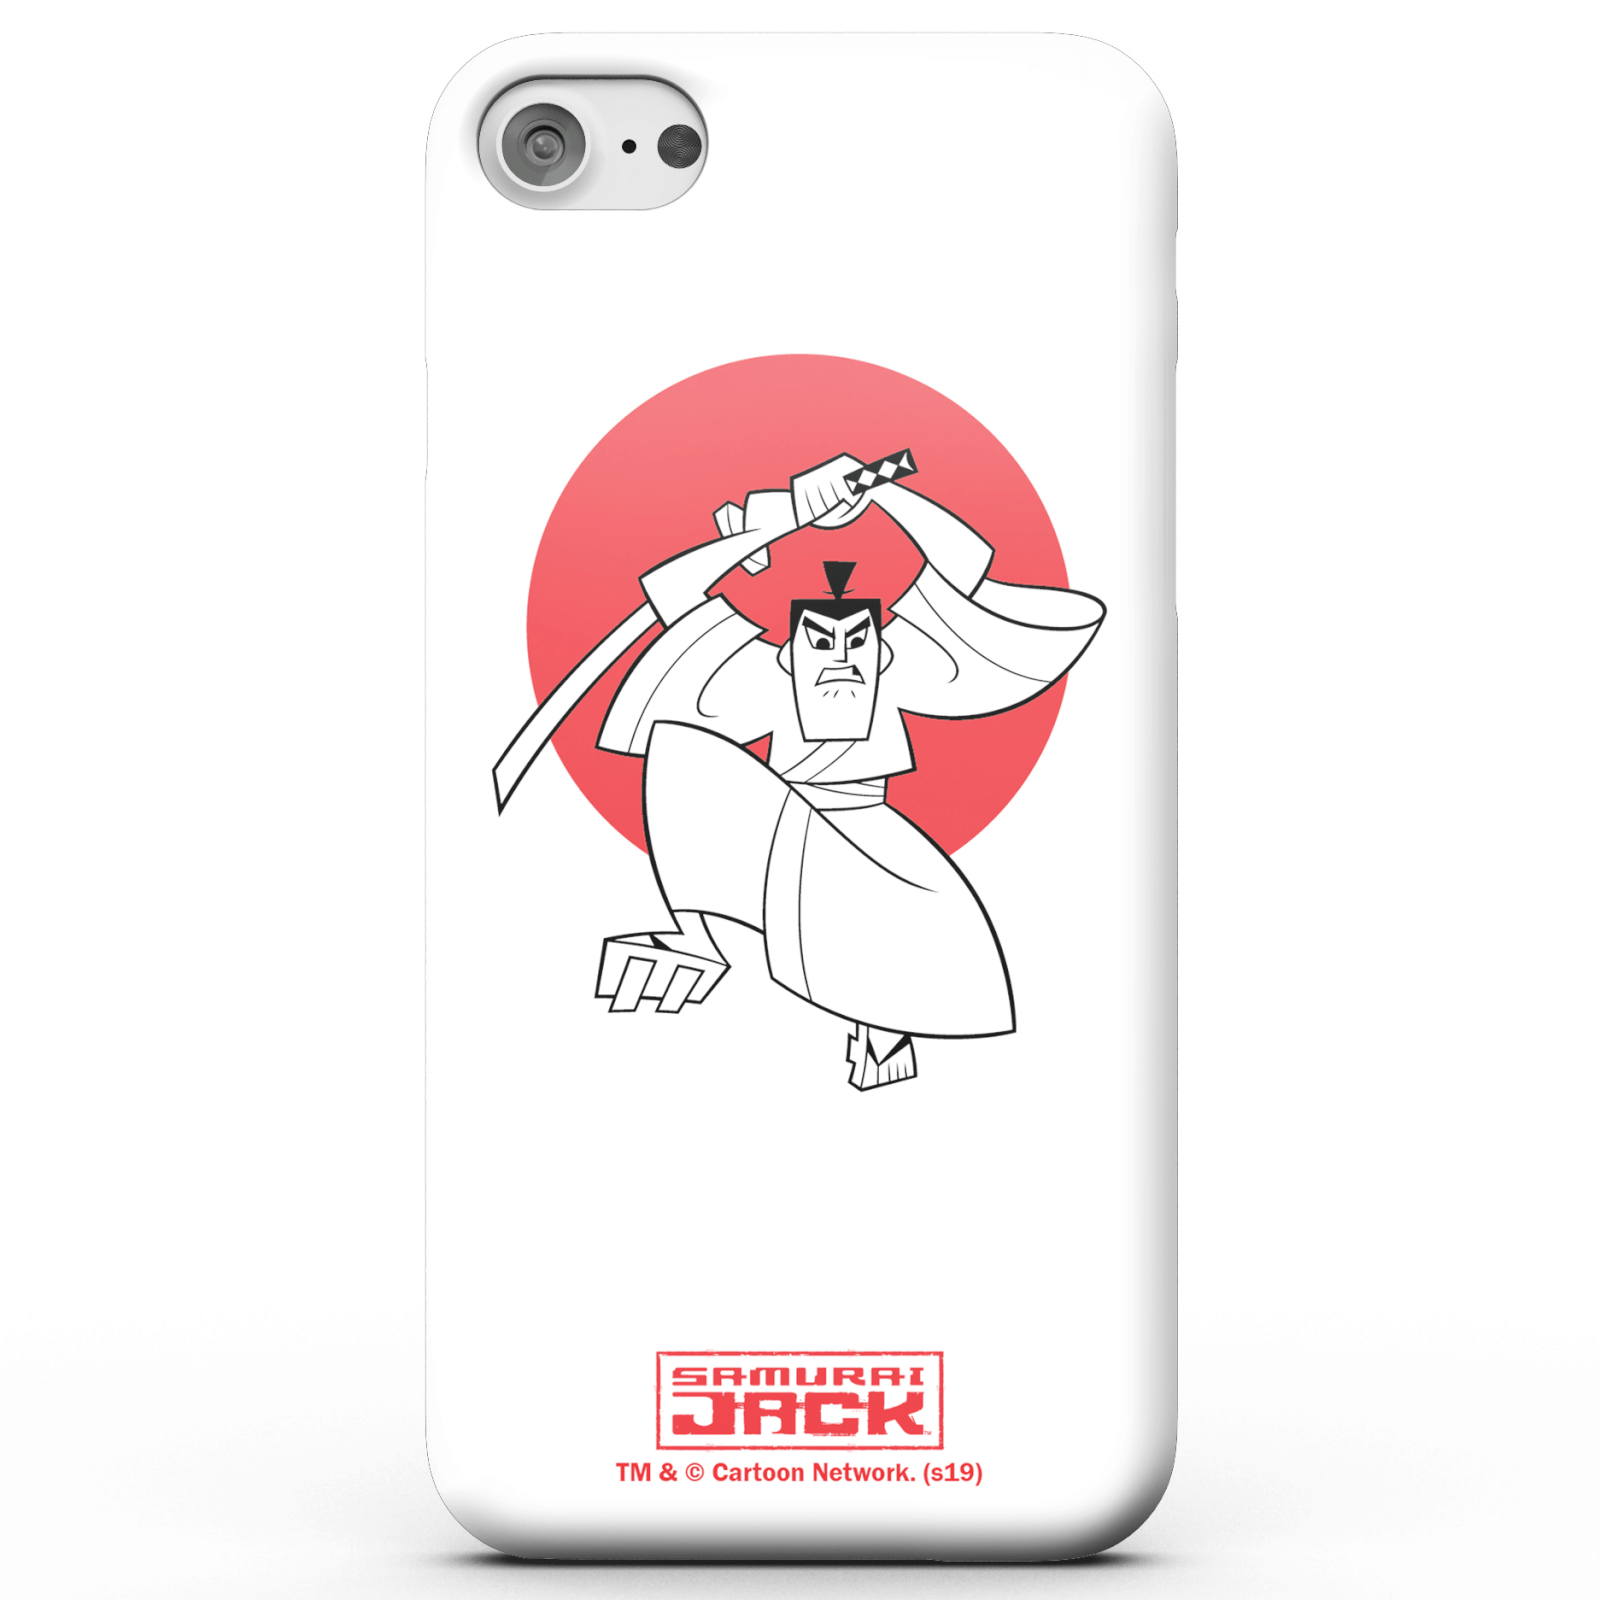 Samurai Jack Sunrise Phone Case for iPhone and Android - iPhone 6S - Snap Case - Gloss